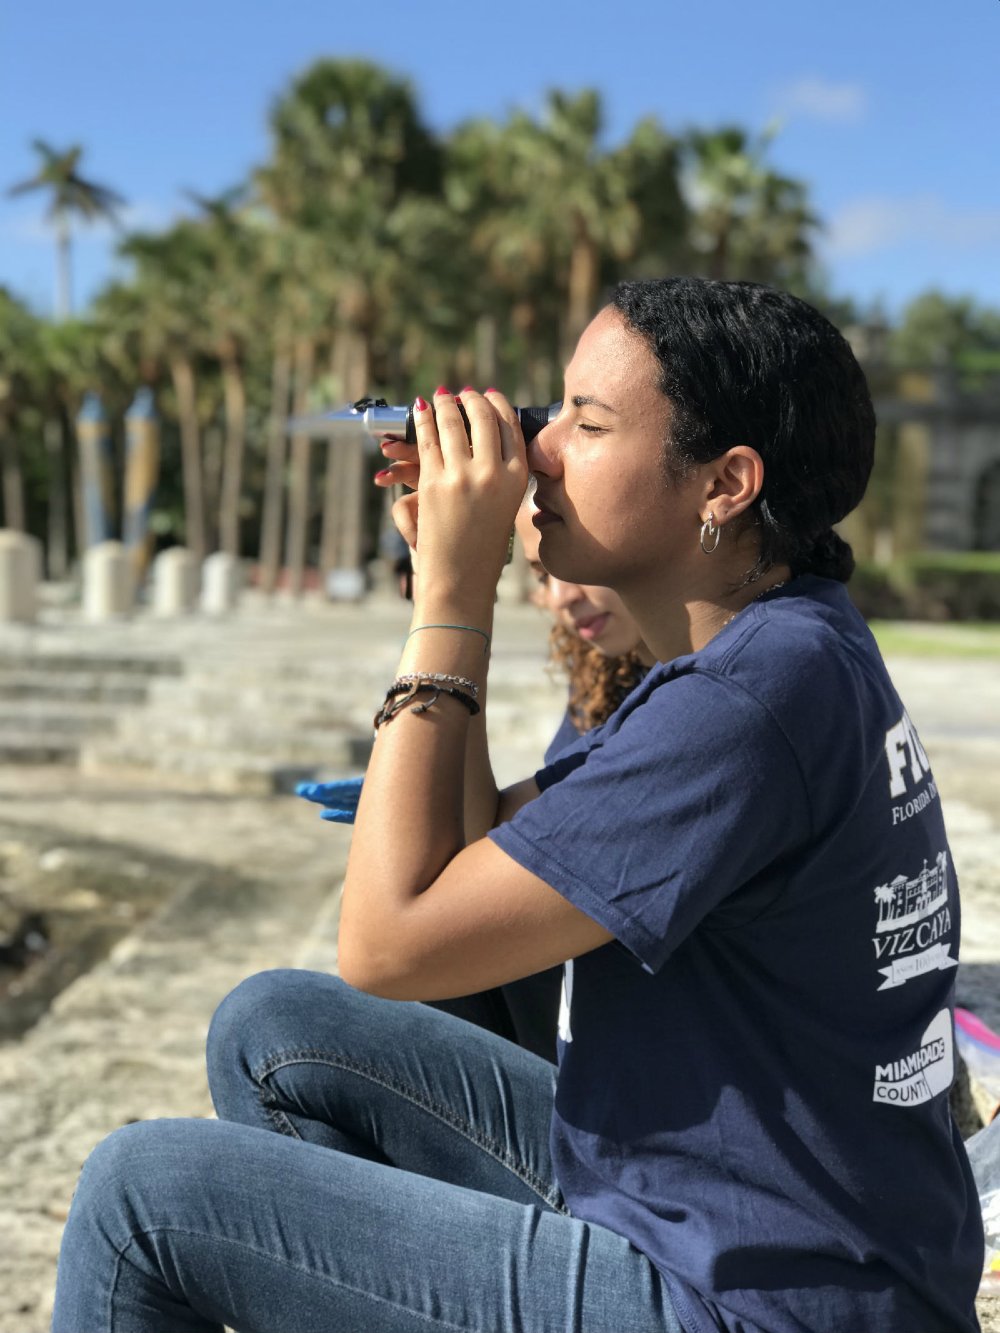 Norhan Elbermawy, FIU student, looks into the refractometer to document salinity content for flooding at the Vizcaya Museum and Gardens.